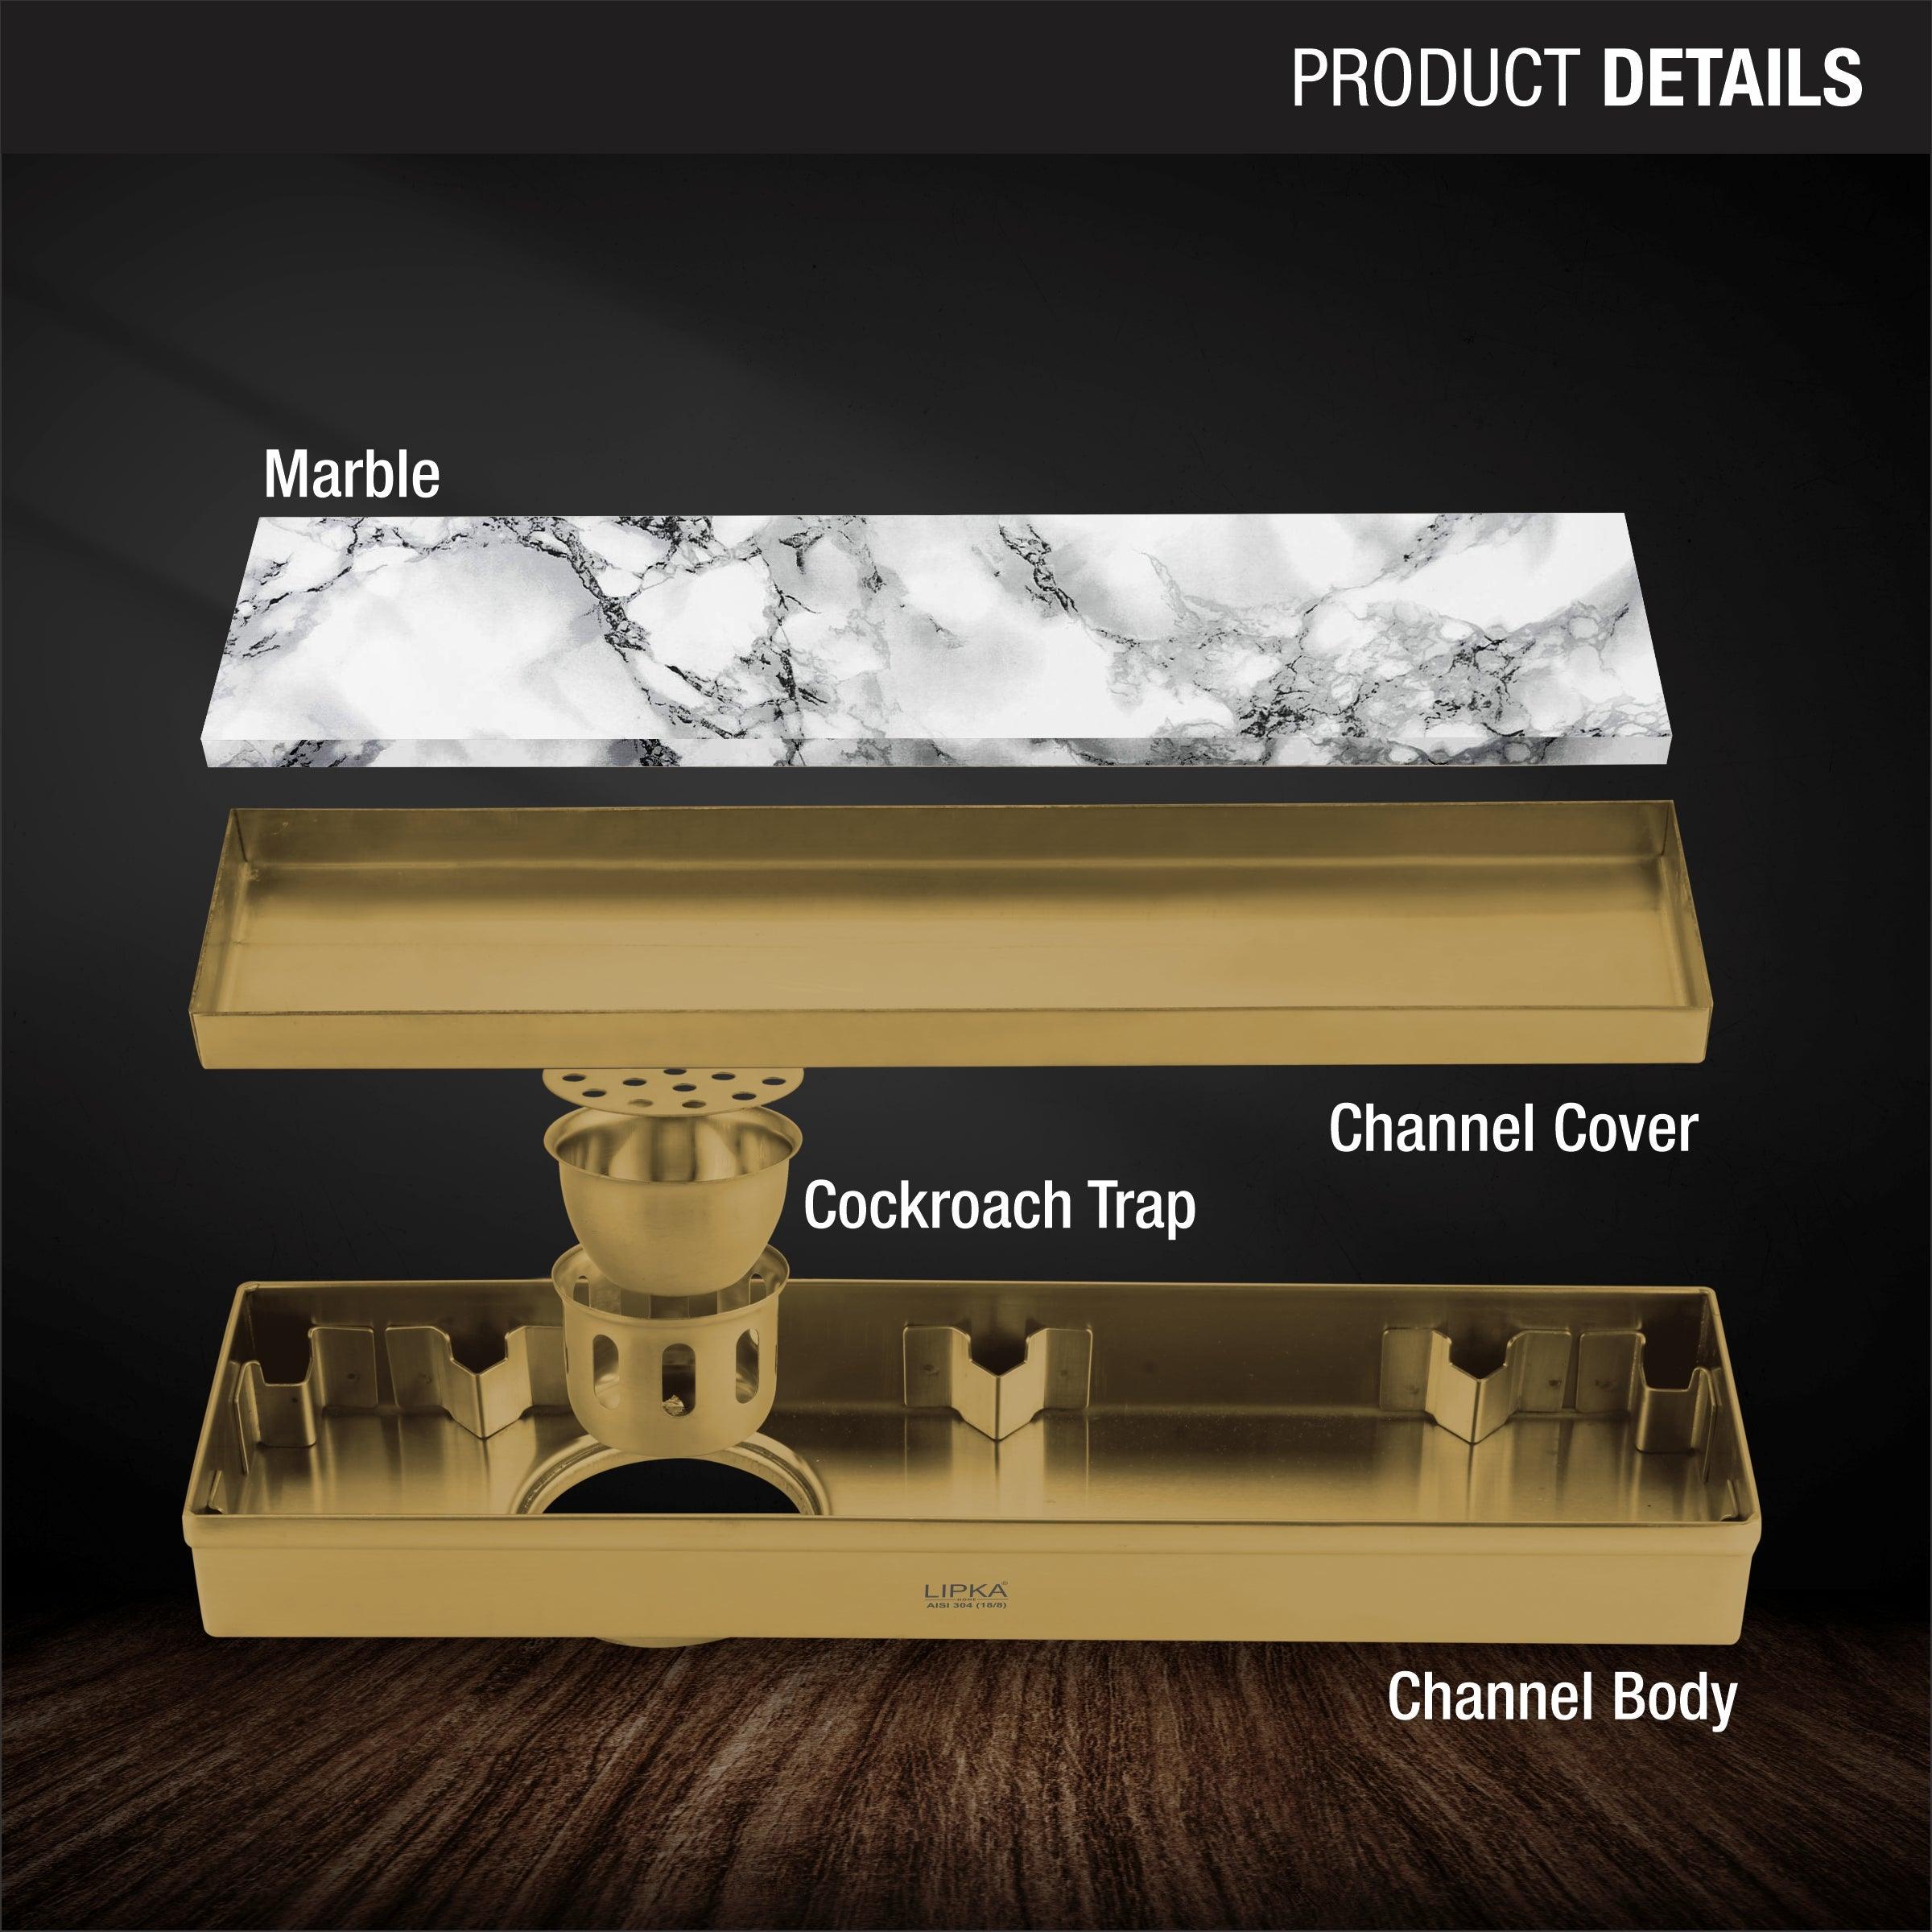 Marble Insert Shower Drain Channel - Yellow Gold (32 x 3 Inches) product details